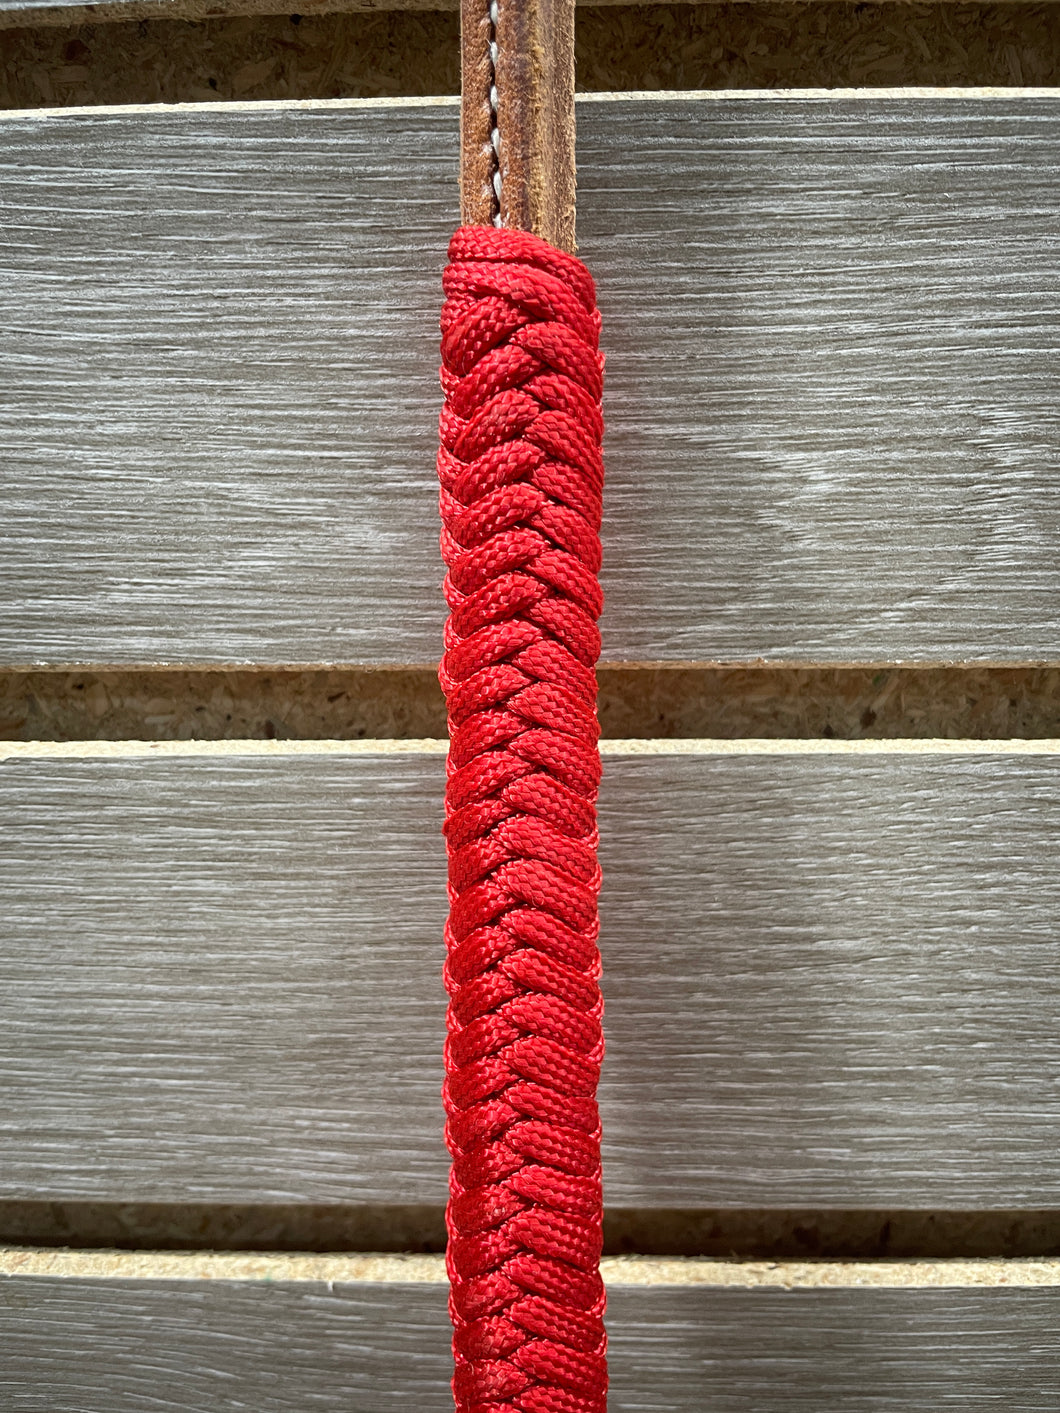 Jerry Beagley Leather Over and Under with Braid